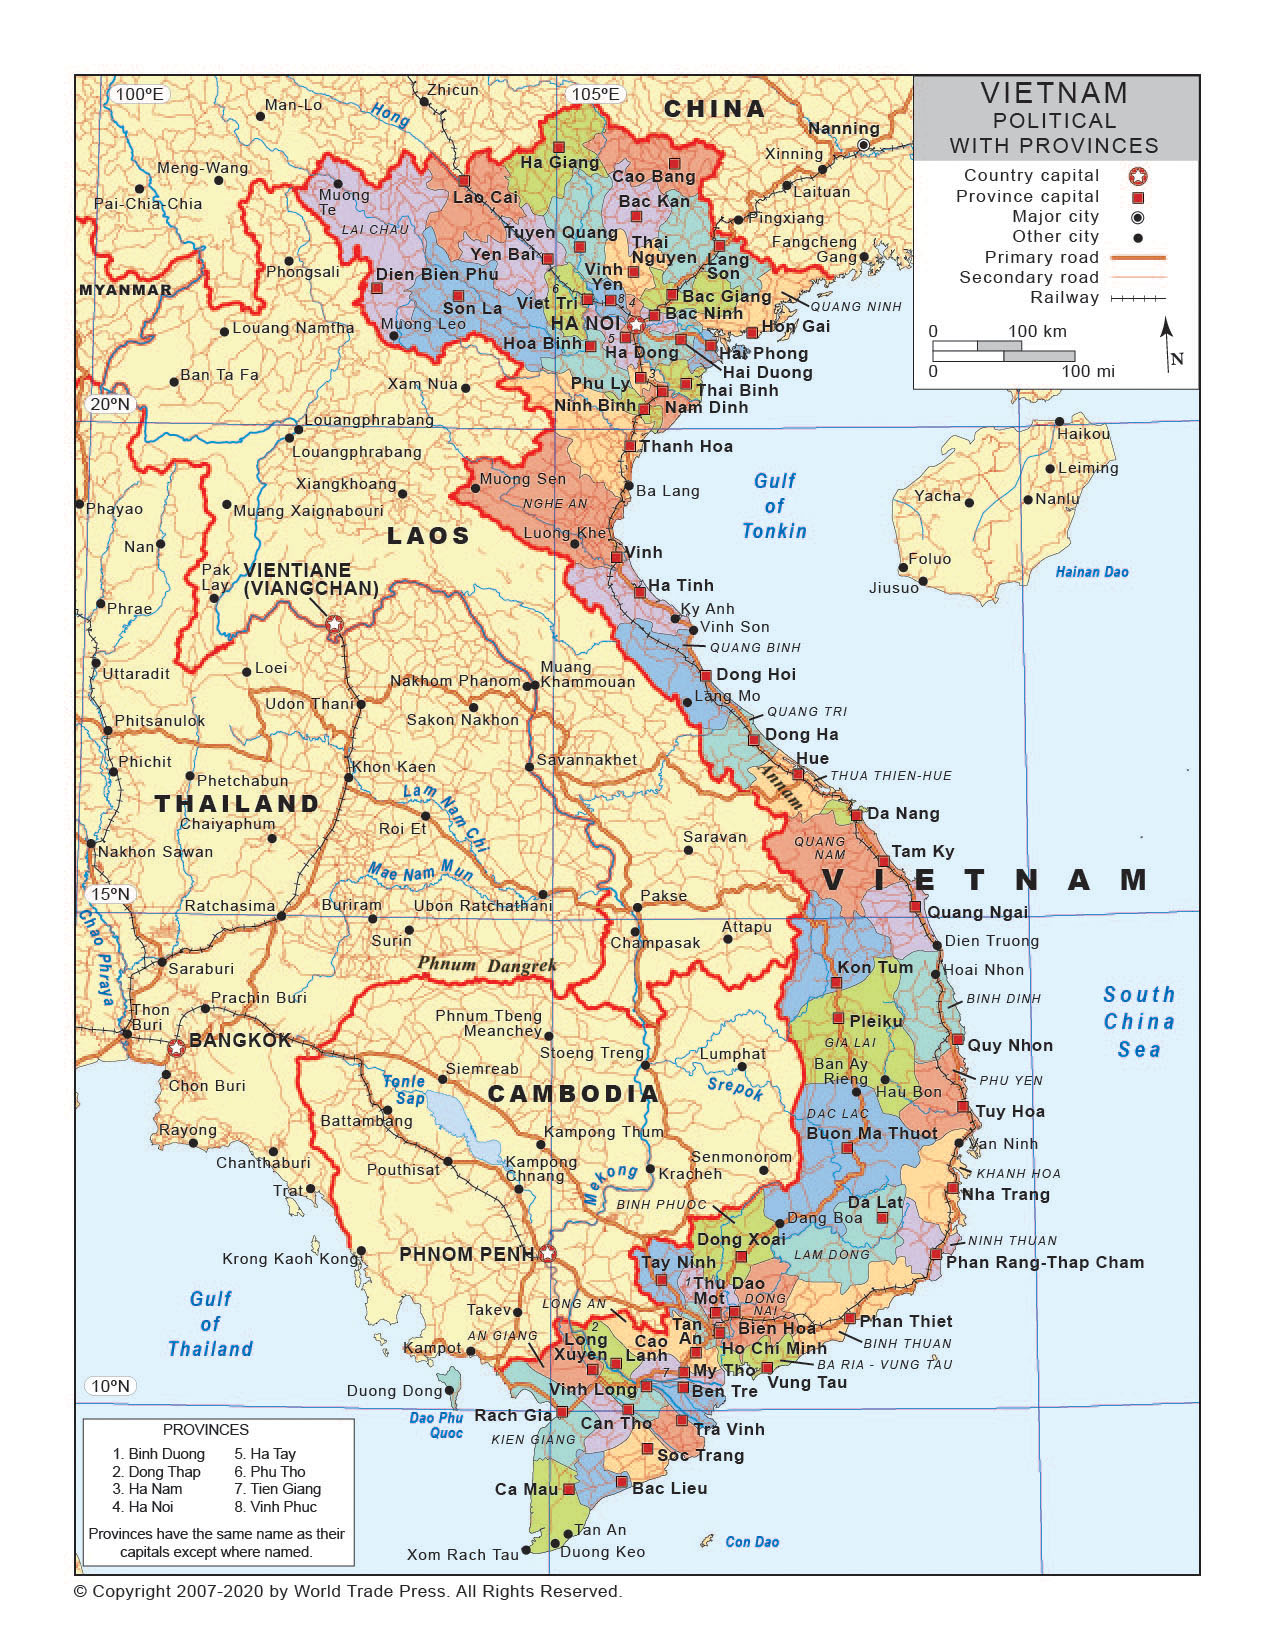 Political Map of Vietnam with Provincial/State Boundaries